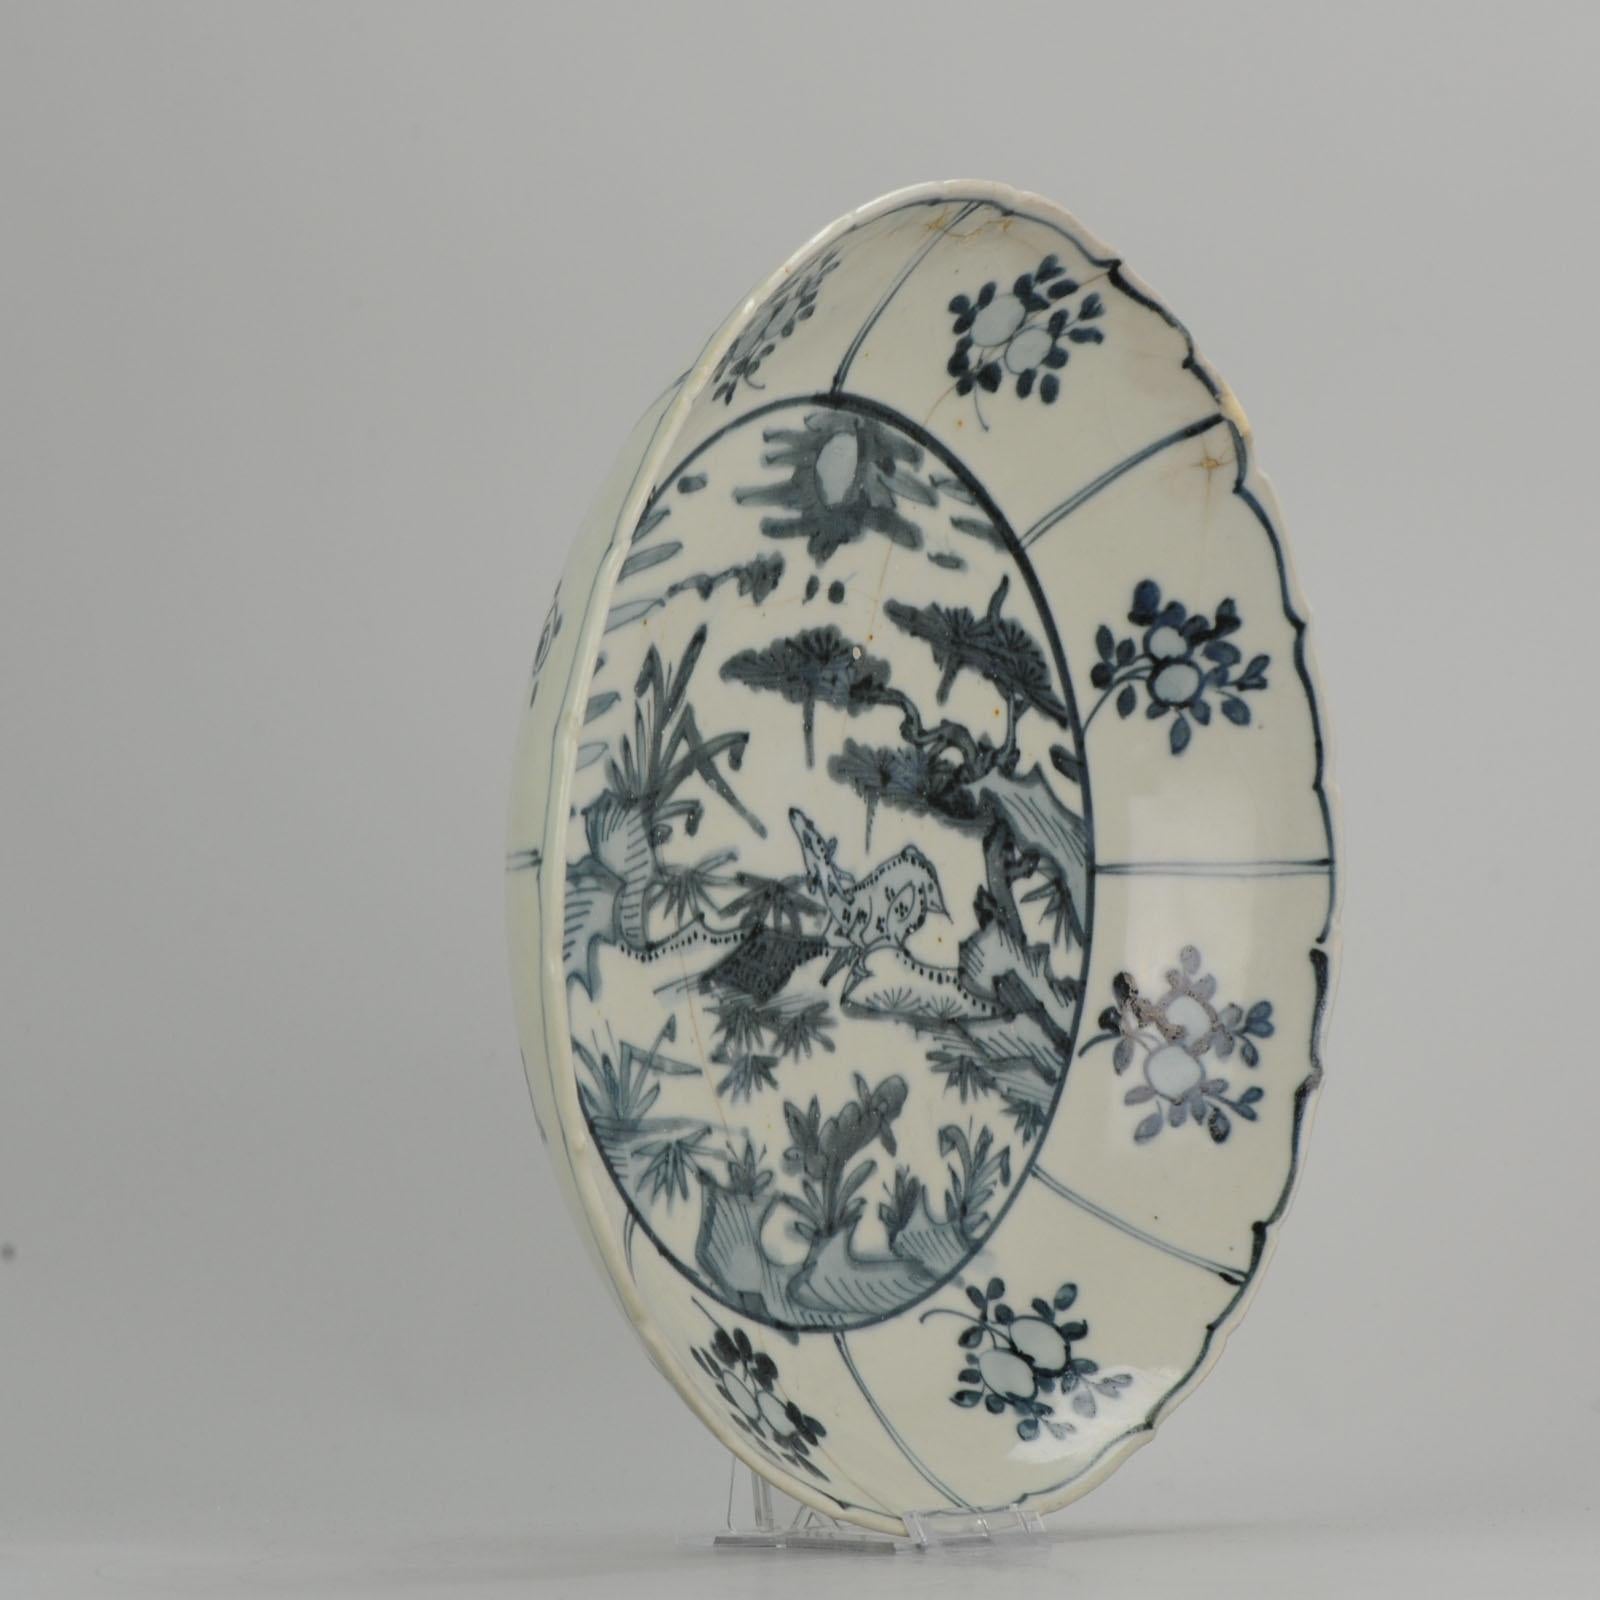 Great Ming plate with a Kraak lay out. Most likely 16th century. Southern China - Swatow - Zhangzou. Decoration of 1 deer at night under a clouded moon and pine tree with a Lingzhi fungus.

Additional information:
Material: Porcelain &